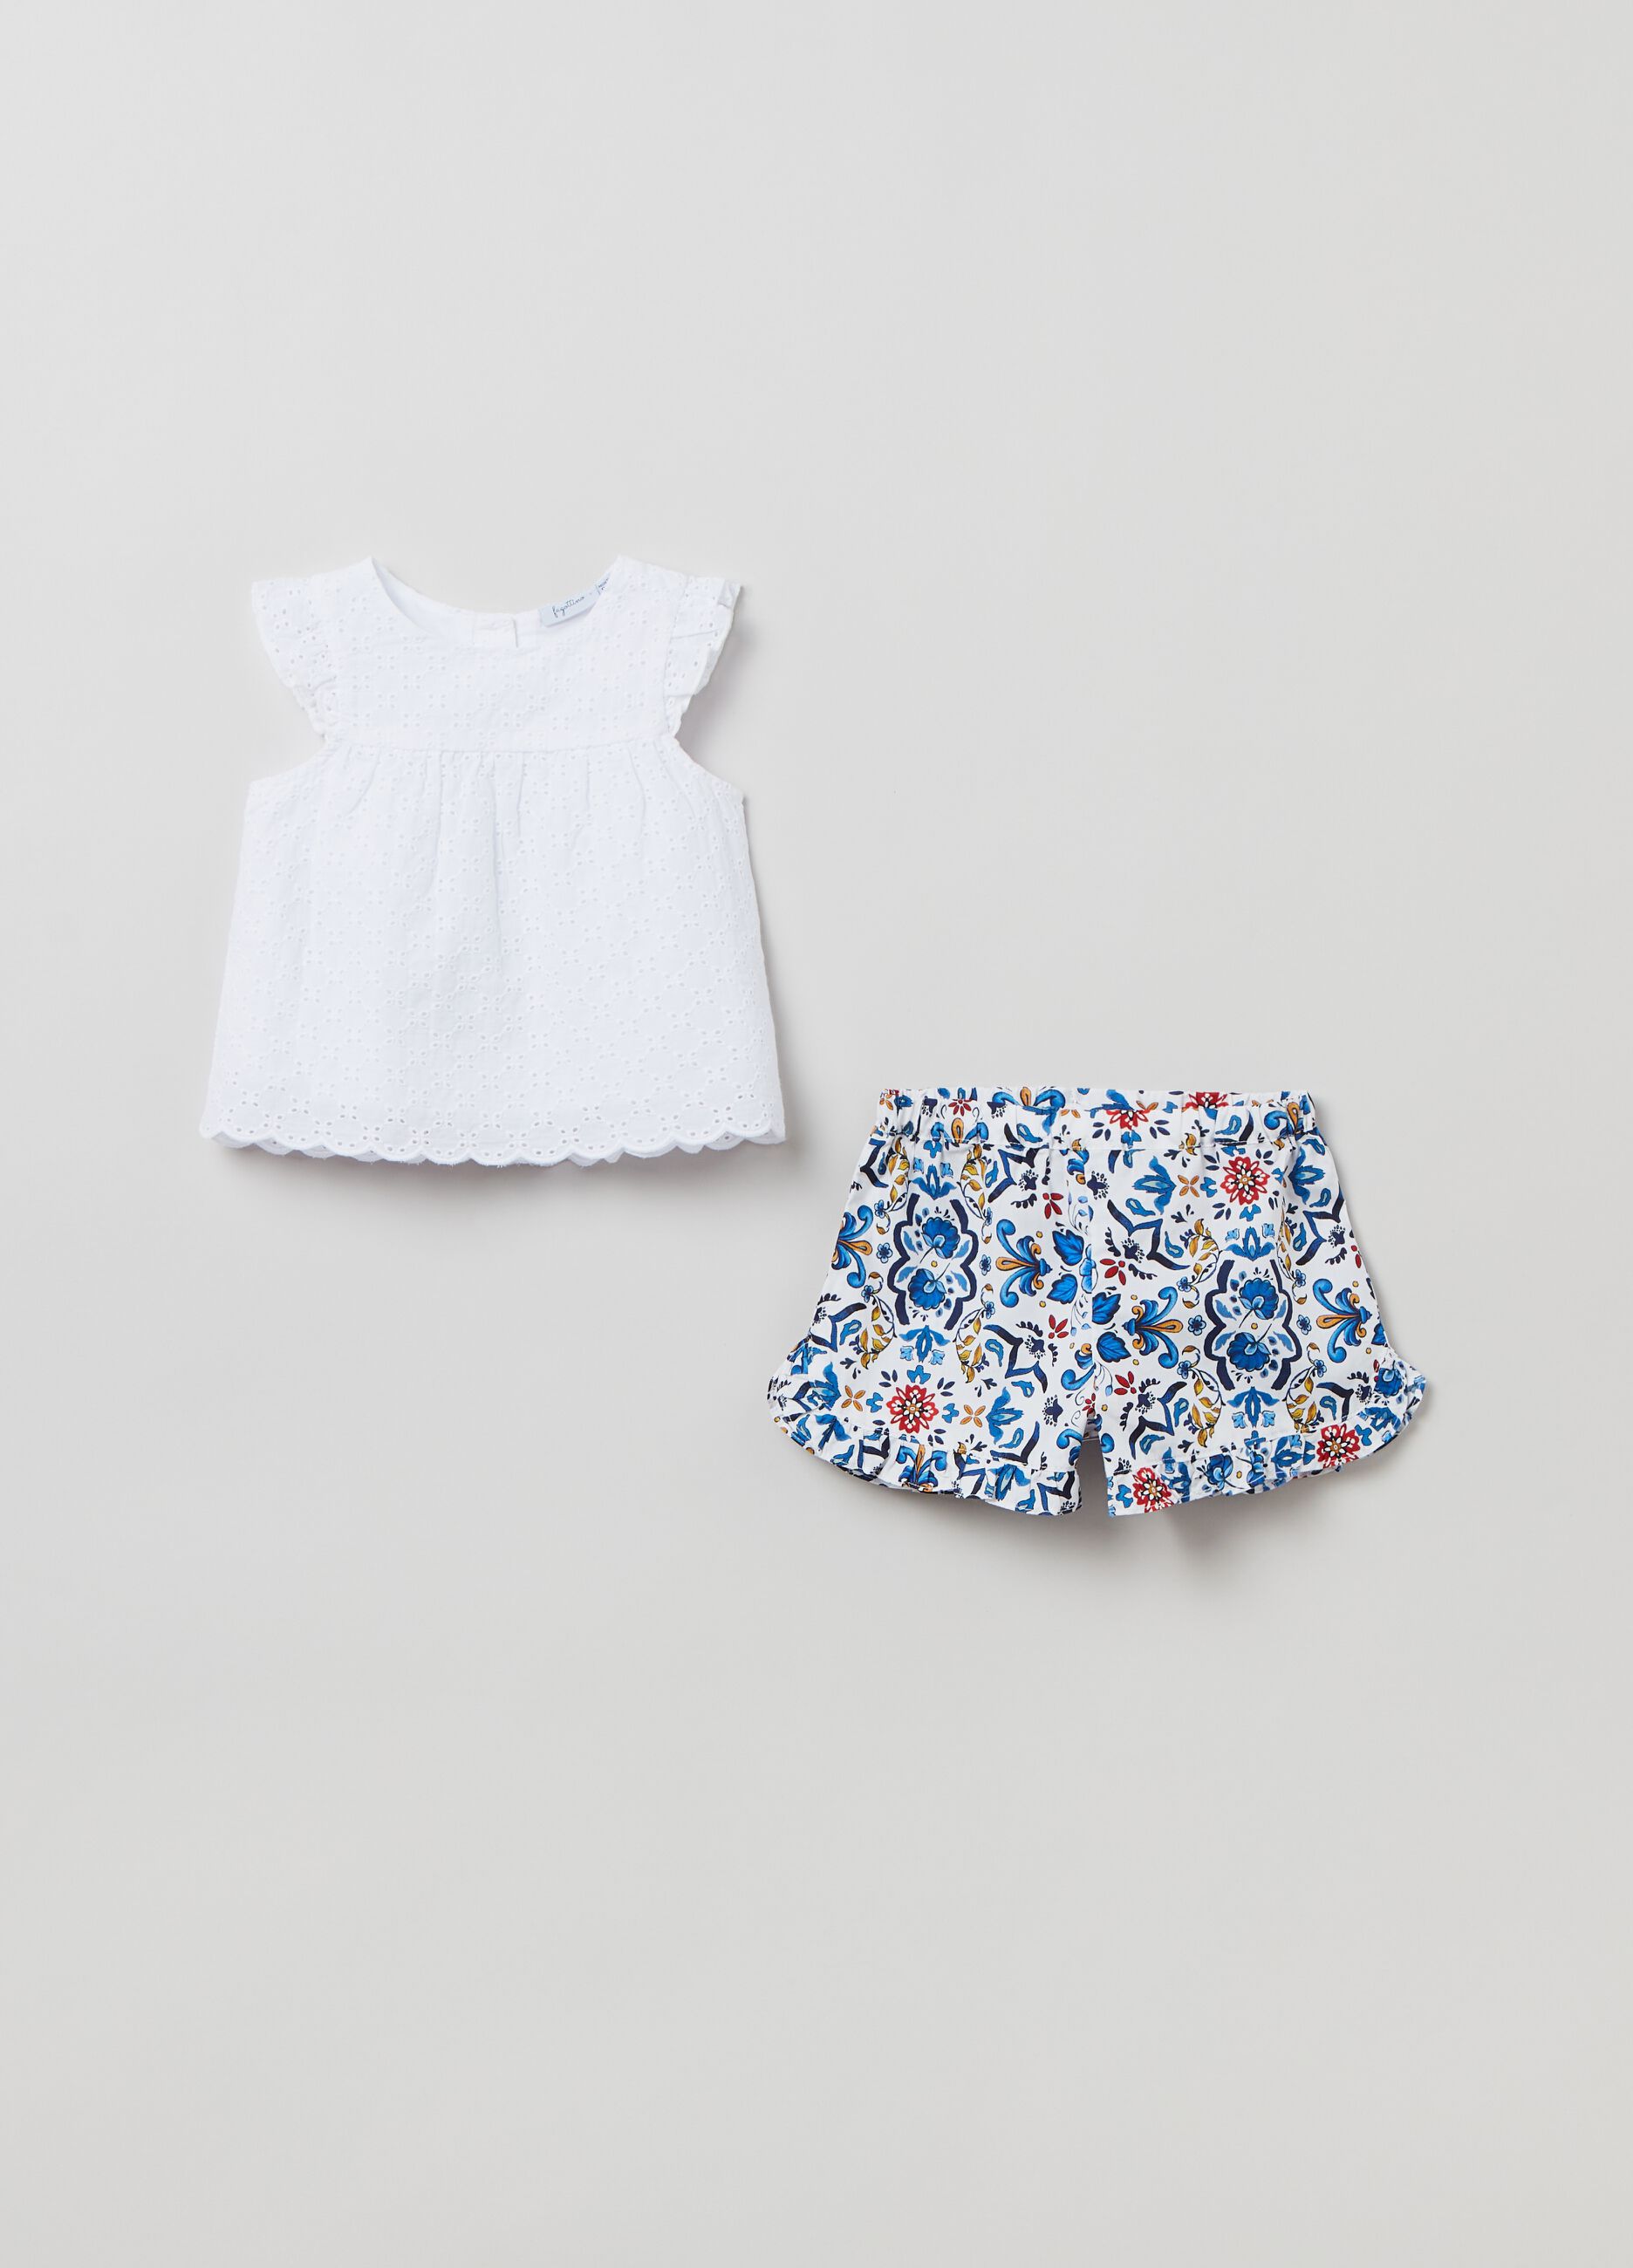 Broderie anglaise blouse and poplin shorts set